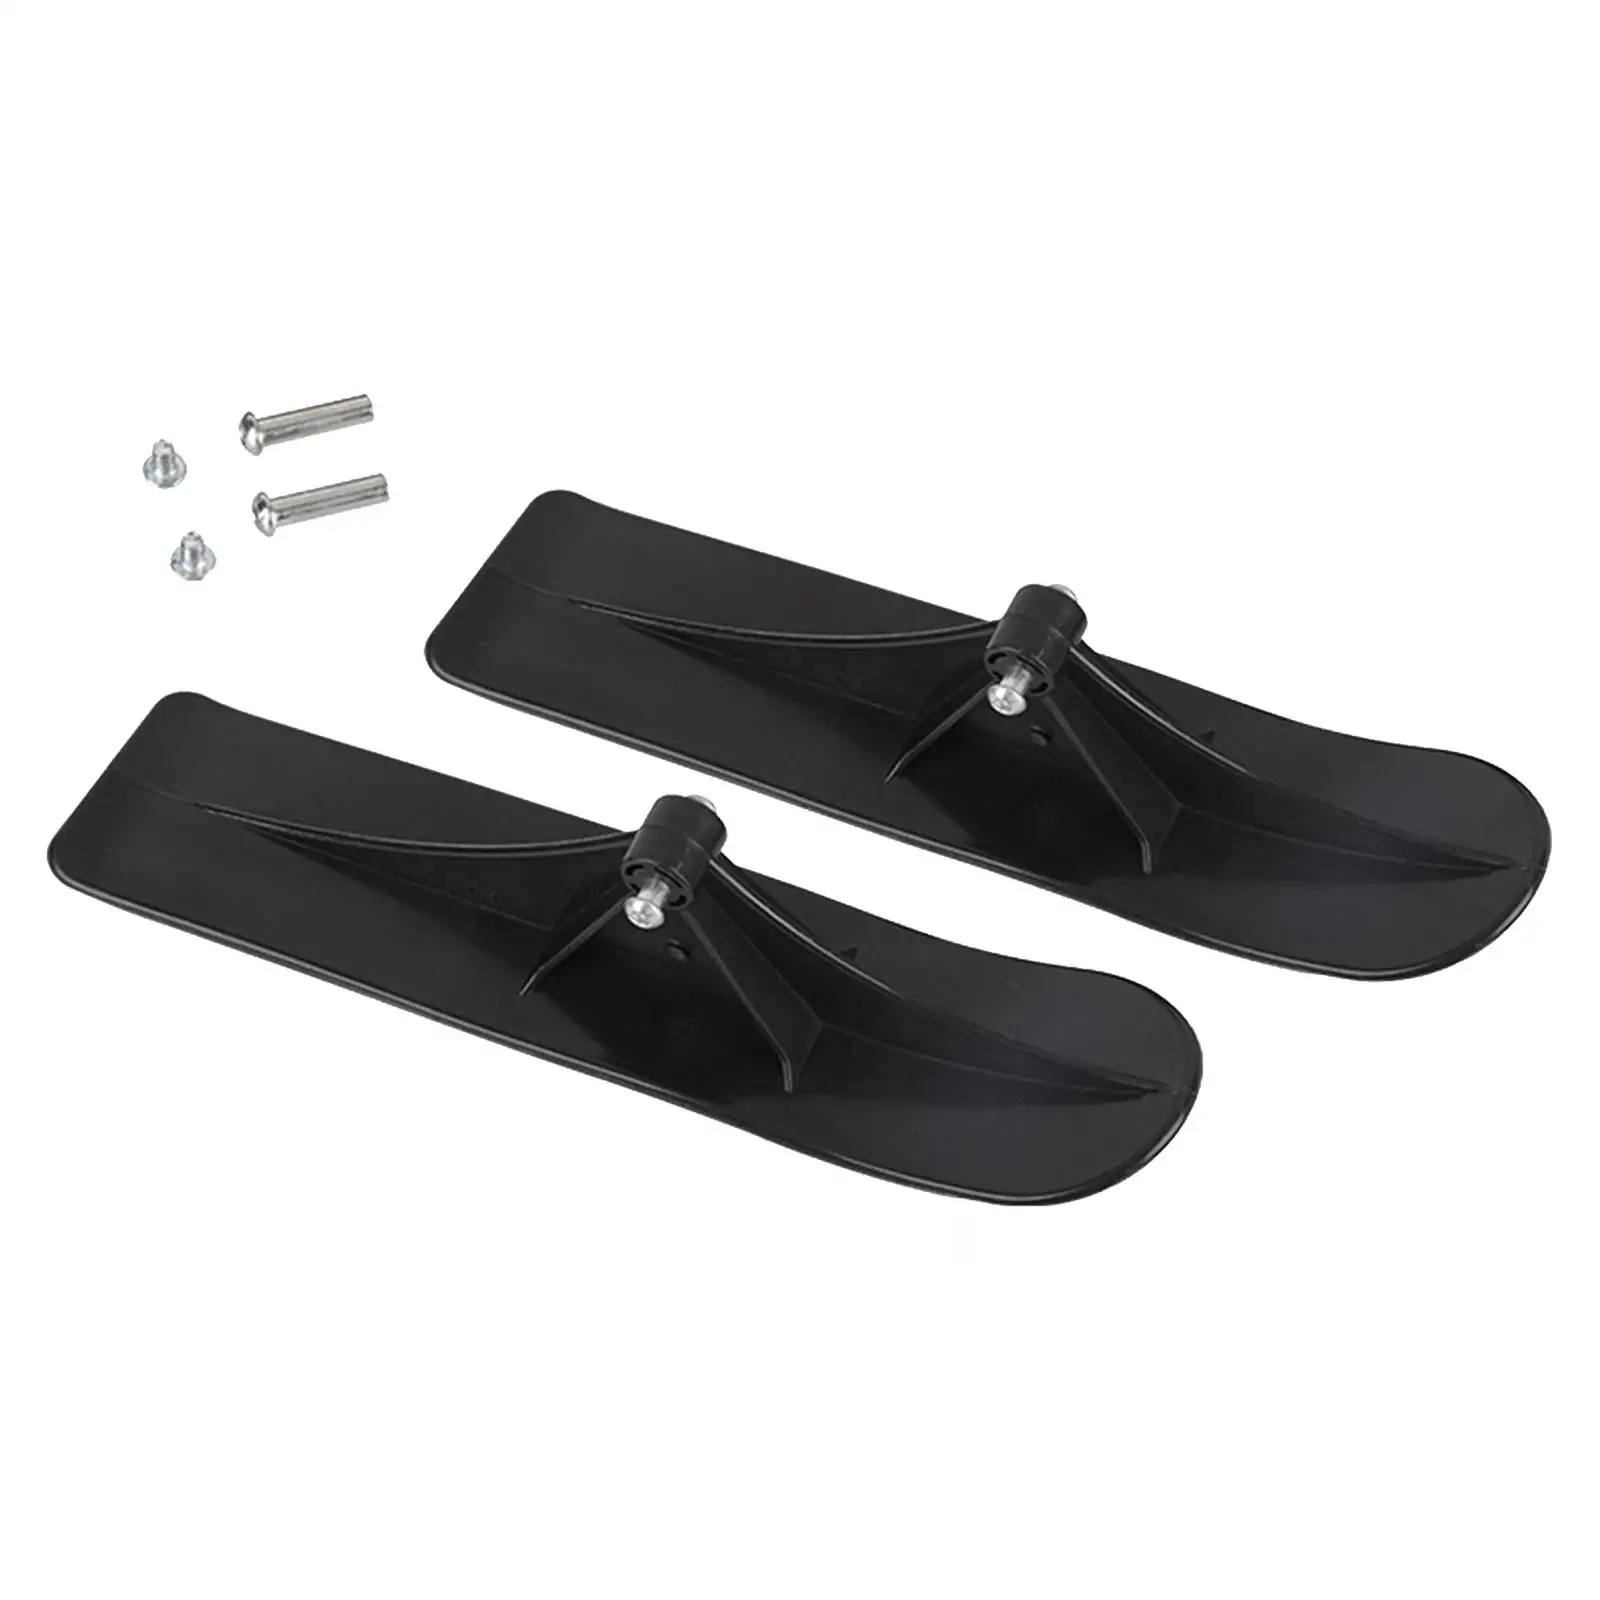 Snow Scooter Ski Sled Toboggan Refit Boots Creative Ski Board for Downhill Sleds Novices